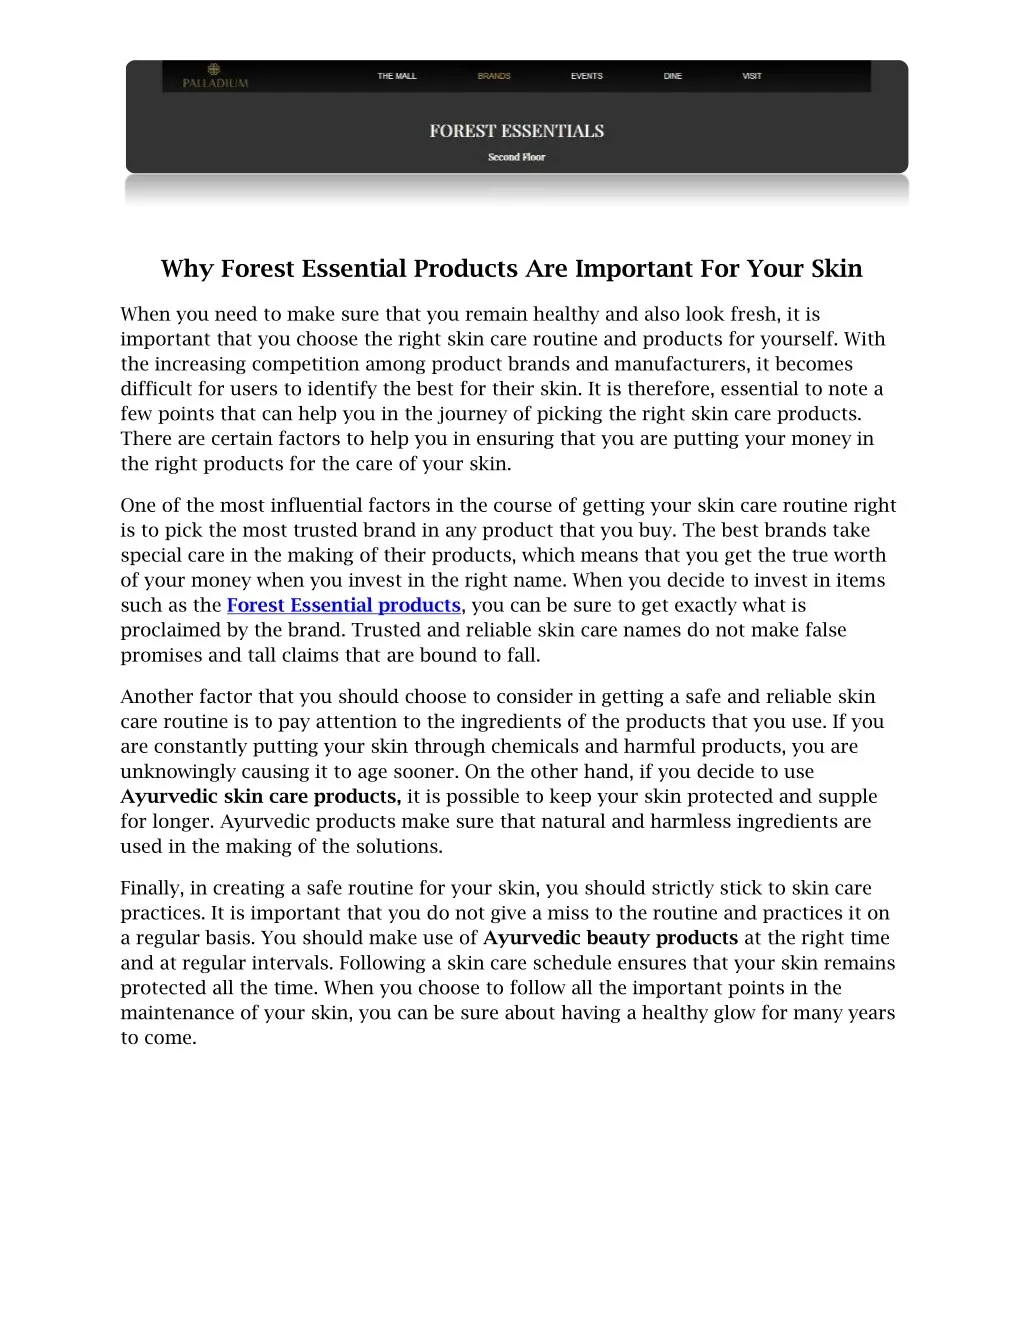 why forest essential products are important